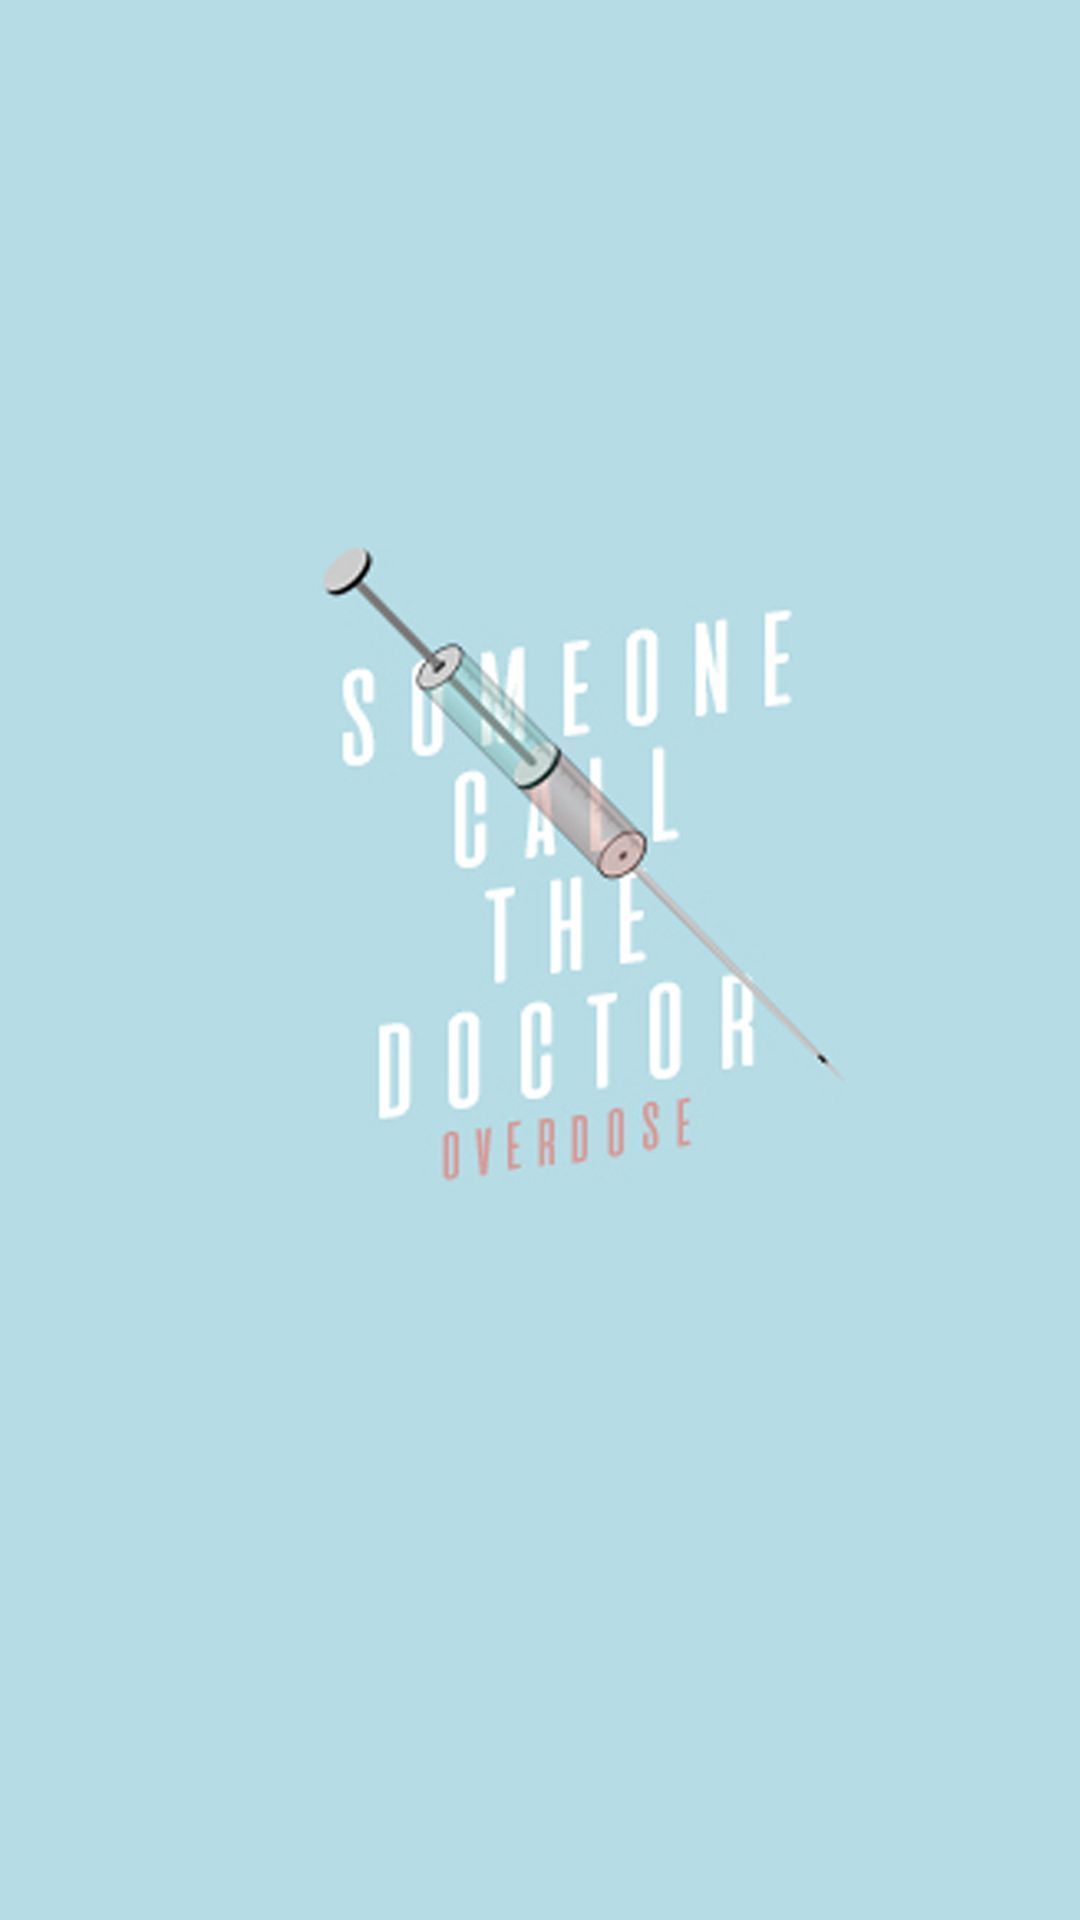 Someone of the doctor overdrive - Medical